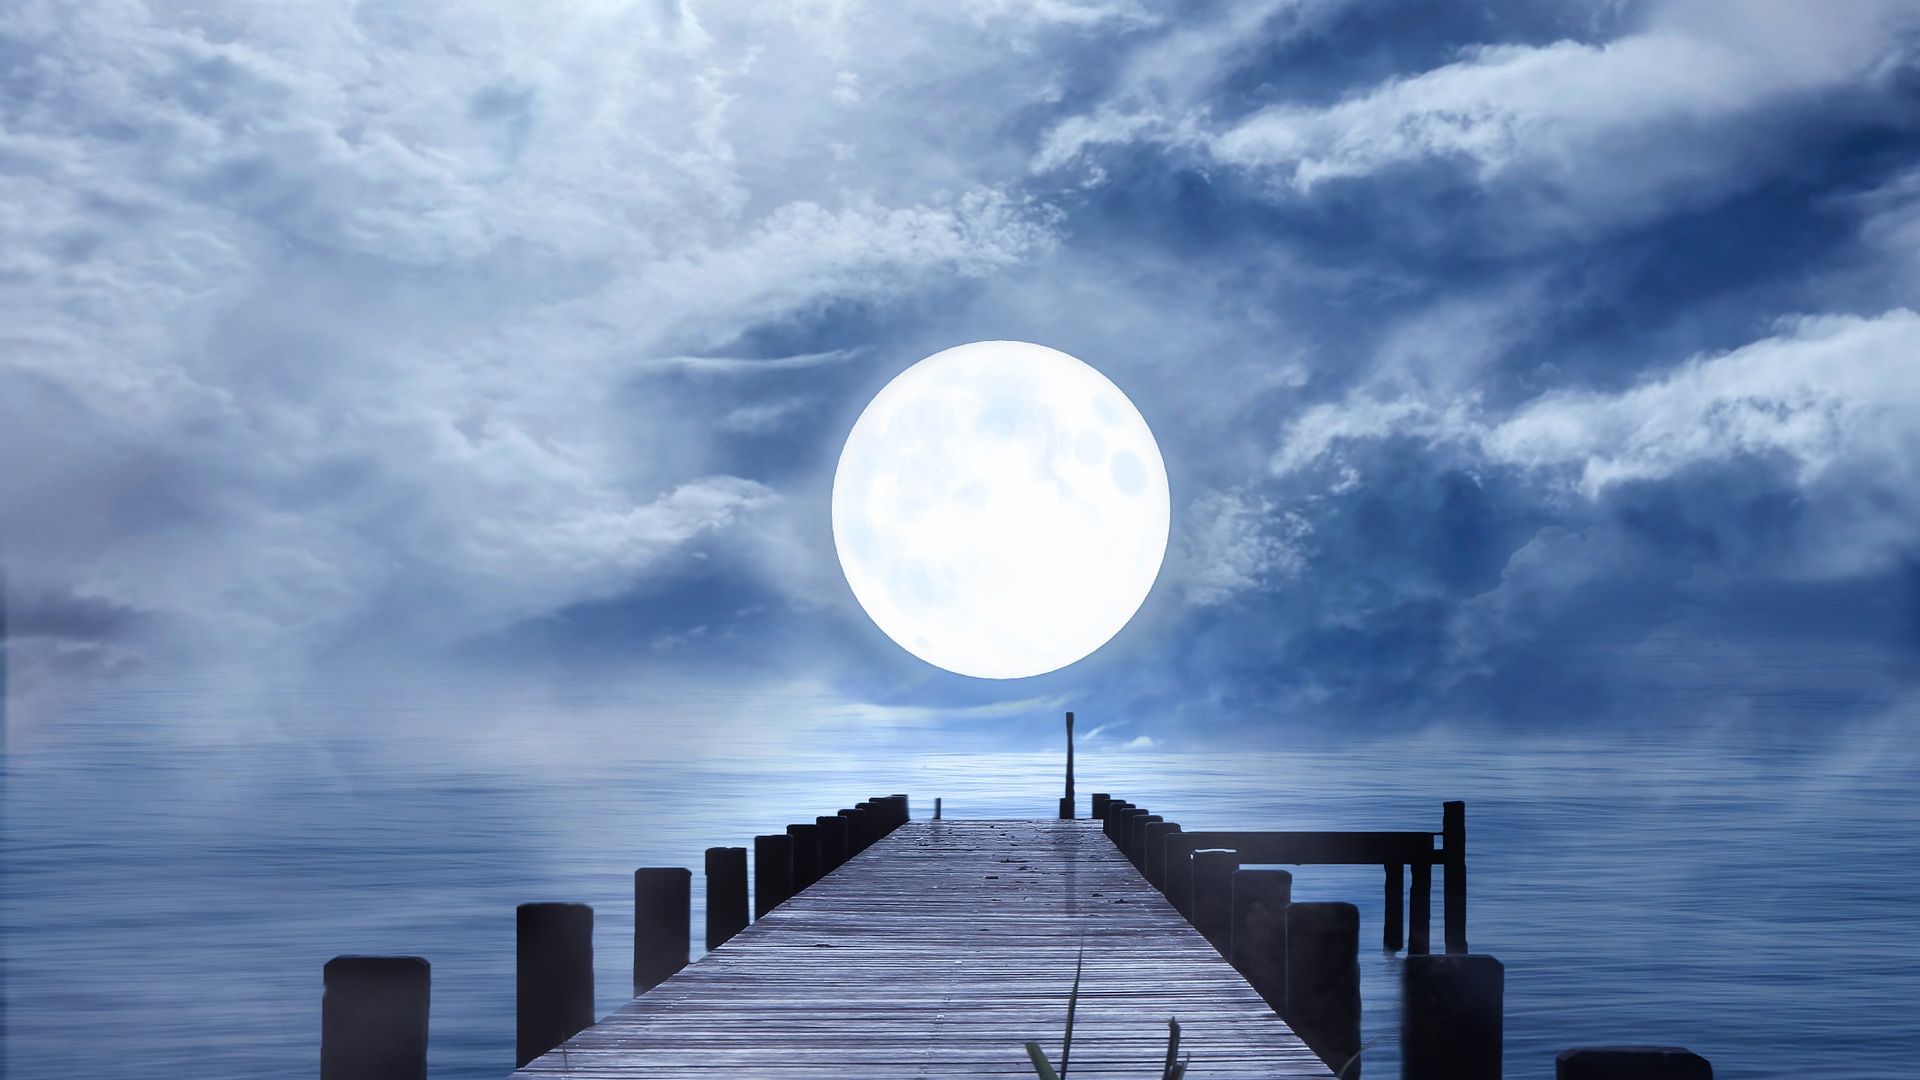 Romantic Nature And Moonlight View   Romantic Nature Images Hd